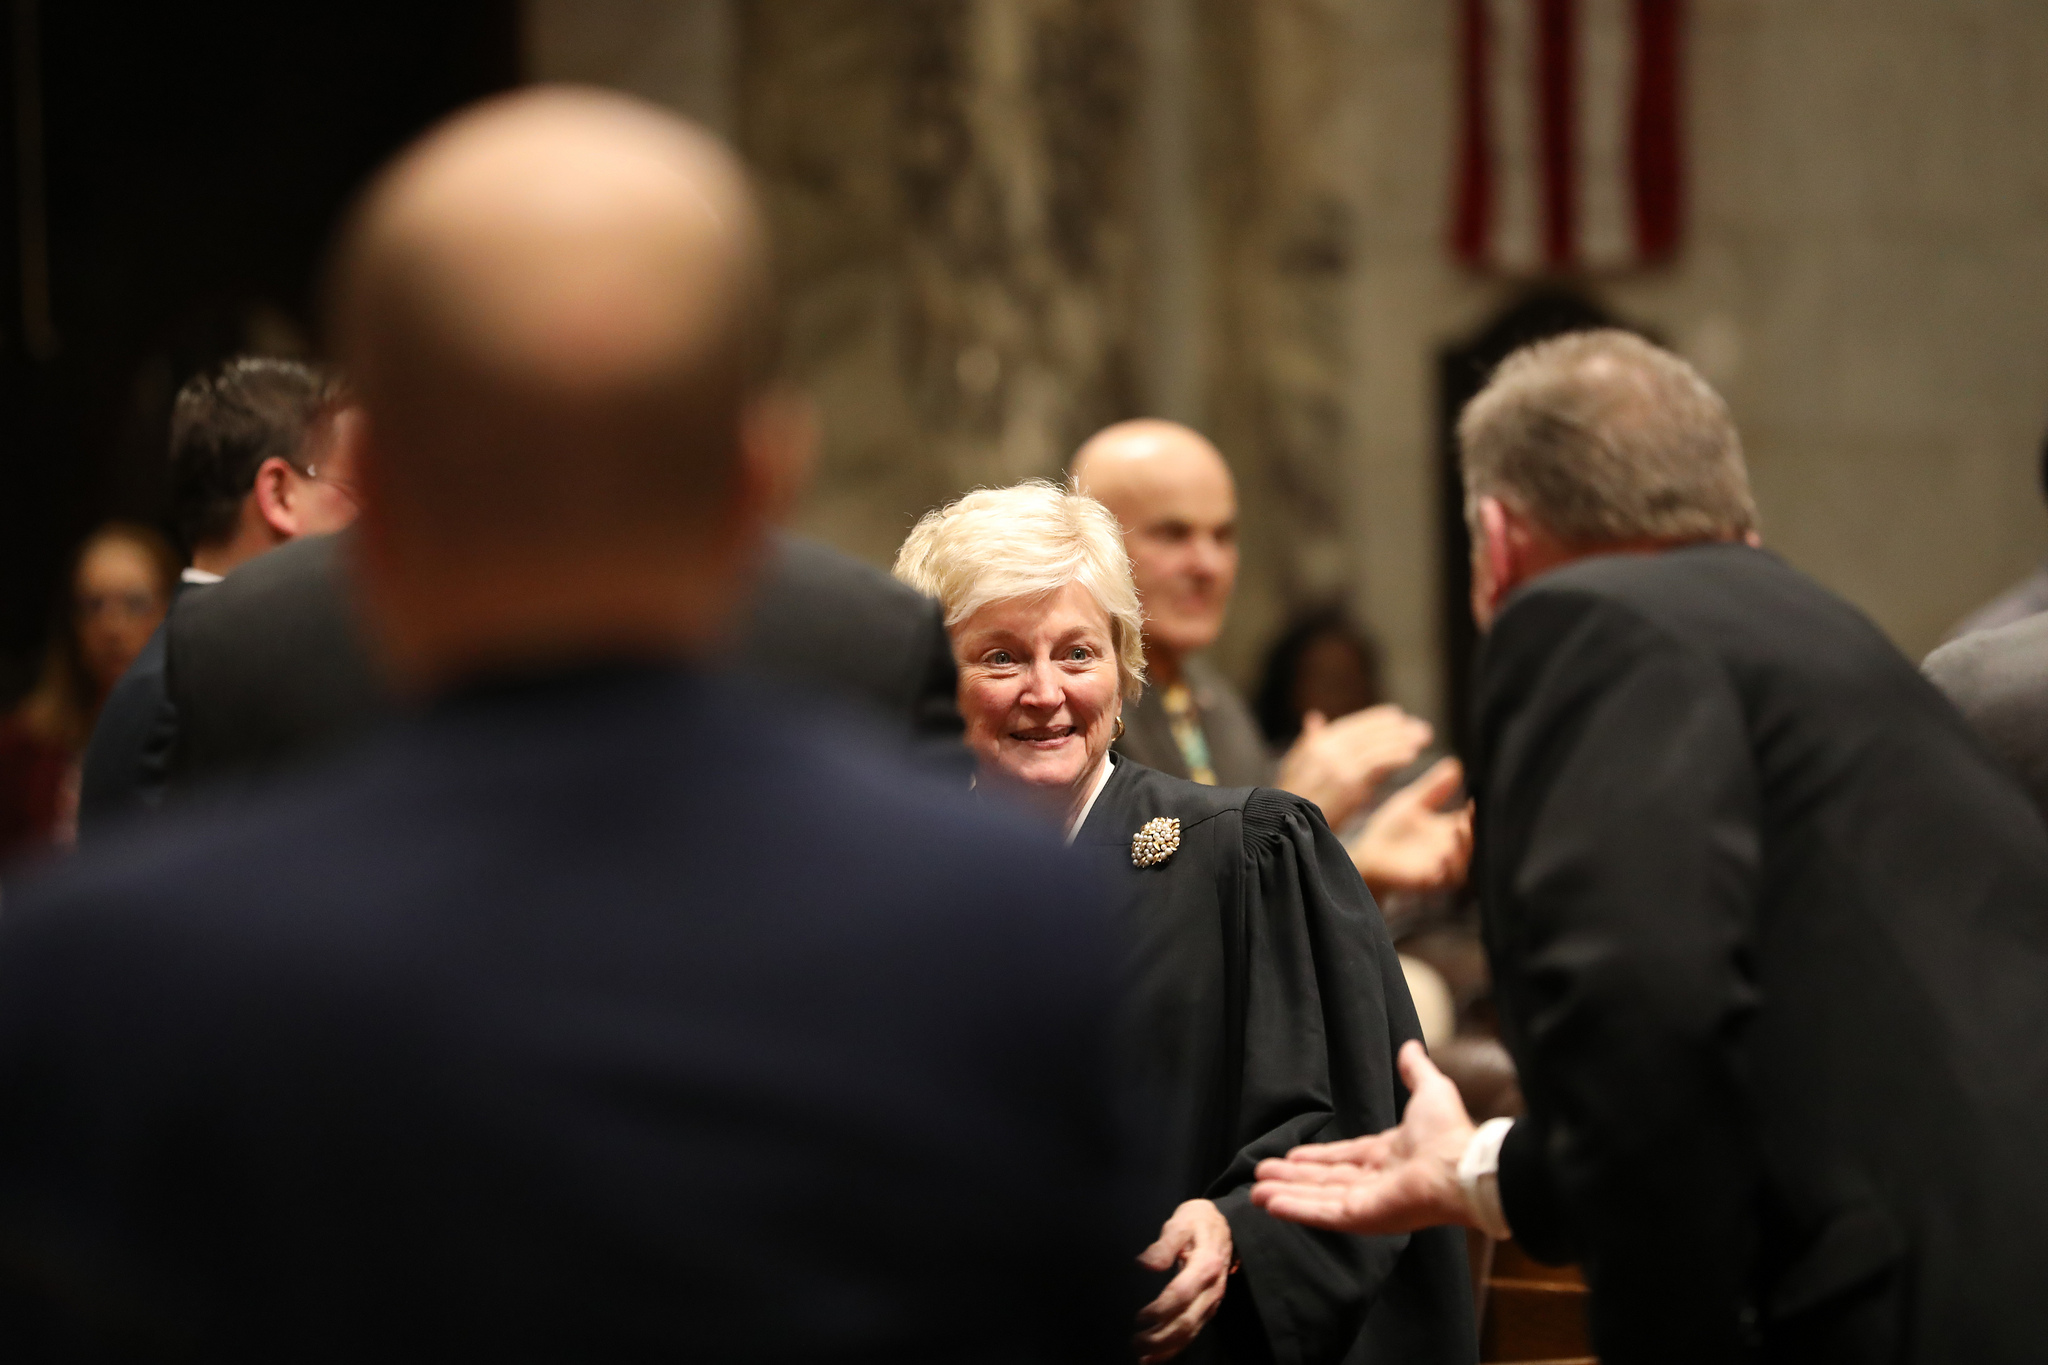 Lawsuit against former Wisconsin Supreme Court justice dismissed after she turns over records